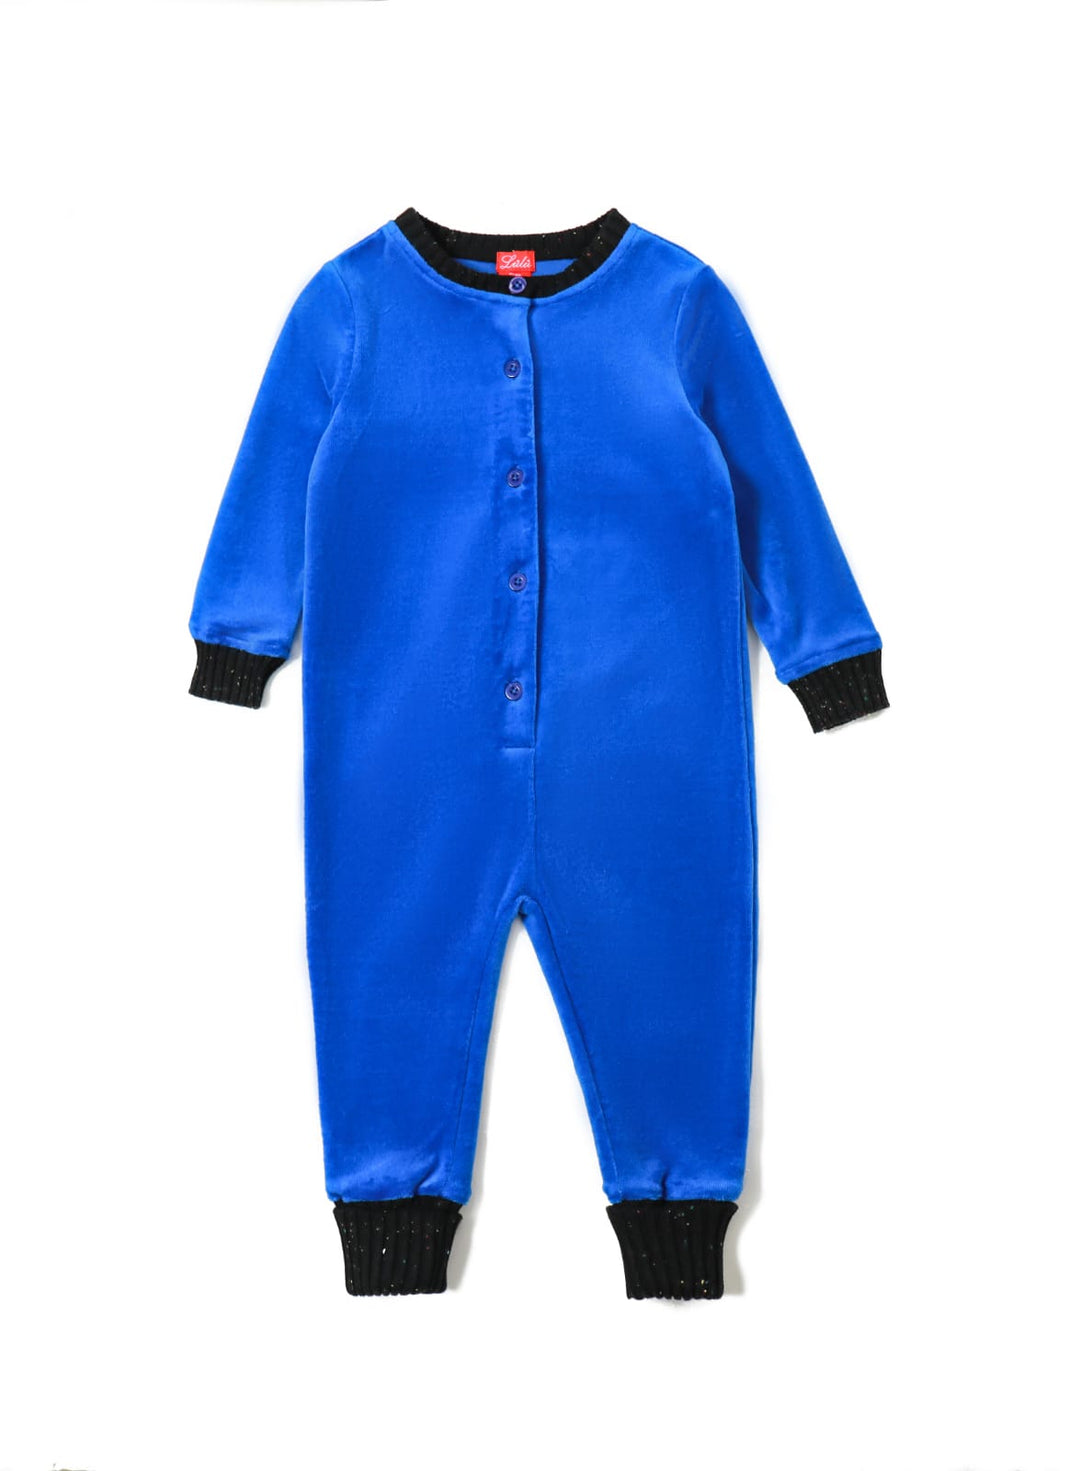 Baby Velour Overall - Royal Blue